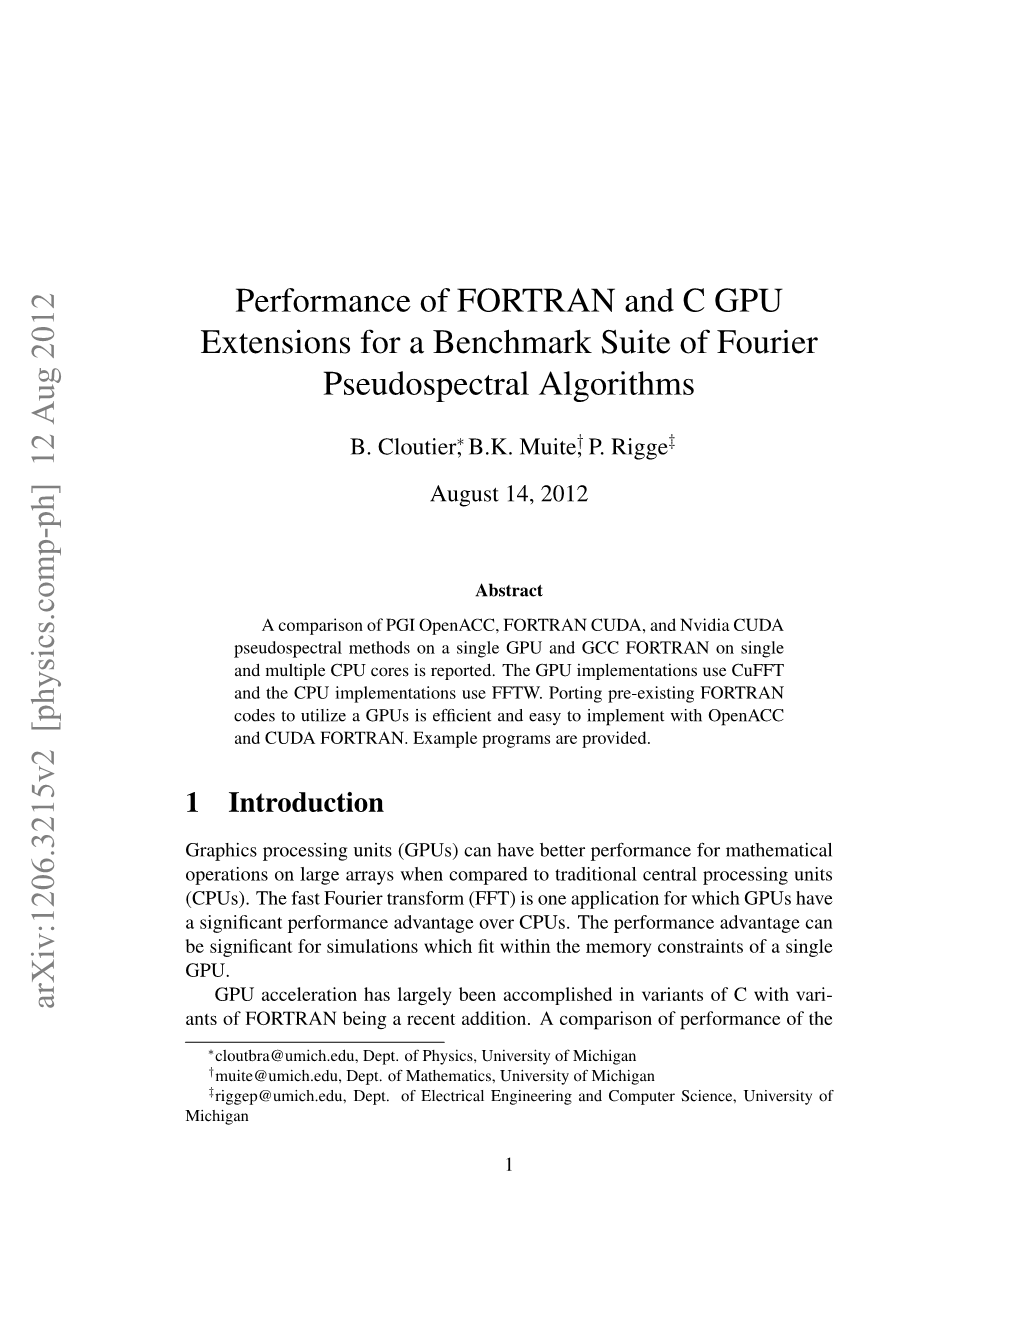 Performance of FORTRAN and C GPU Extensions for a Benchmark Suite of Fourier Pseudospectral Algorithms Arxiv:1206.3215V2 [Physi